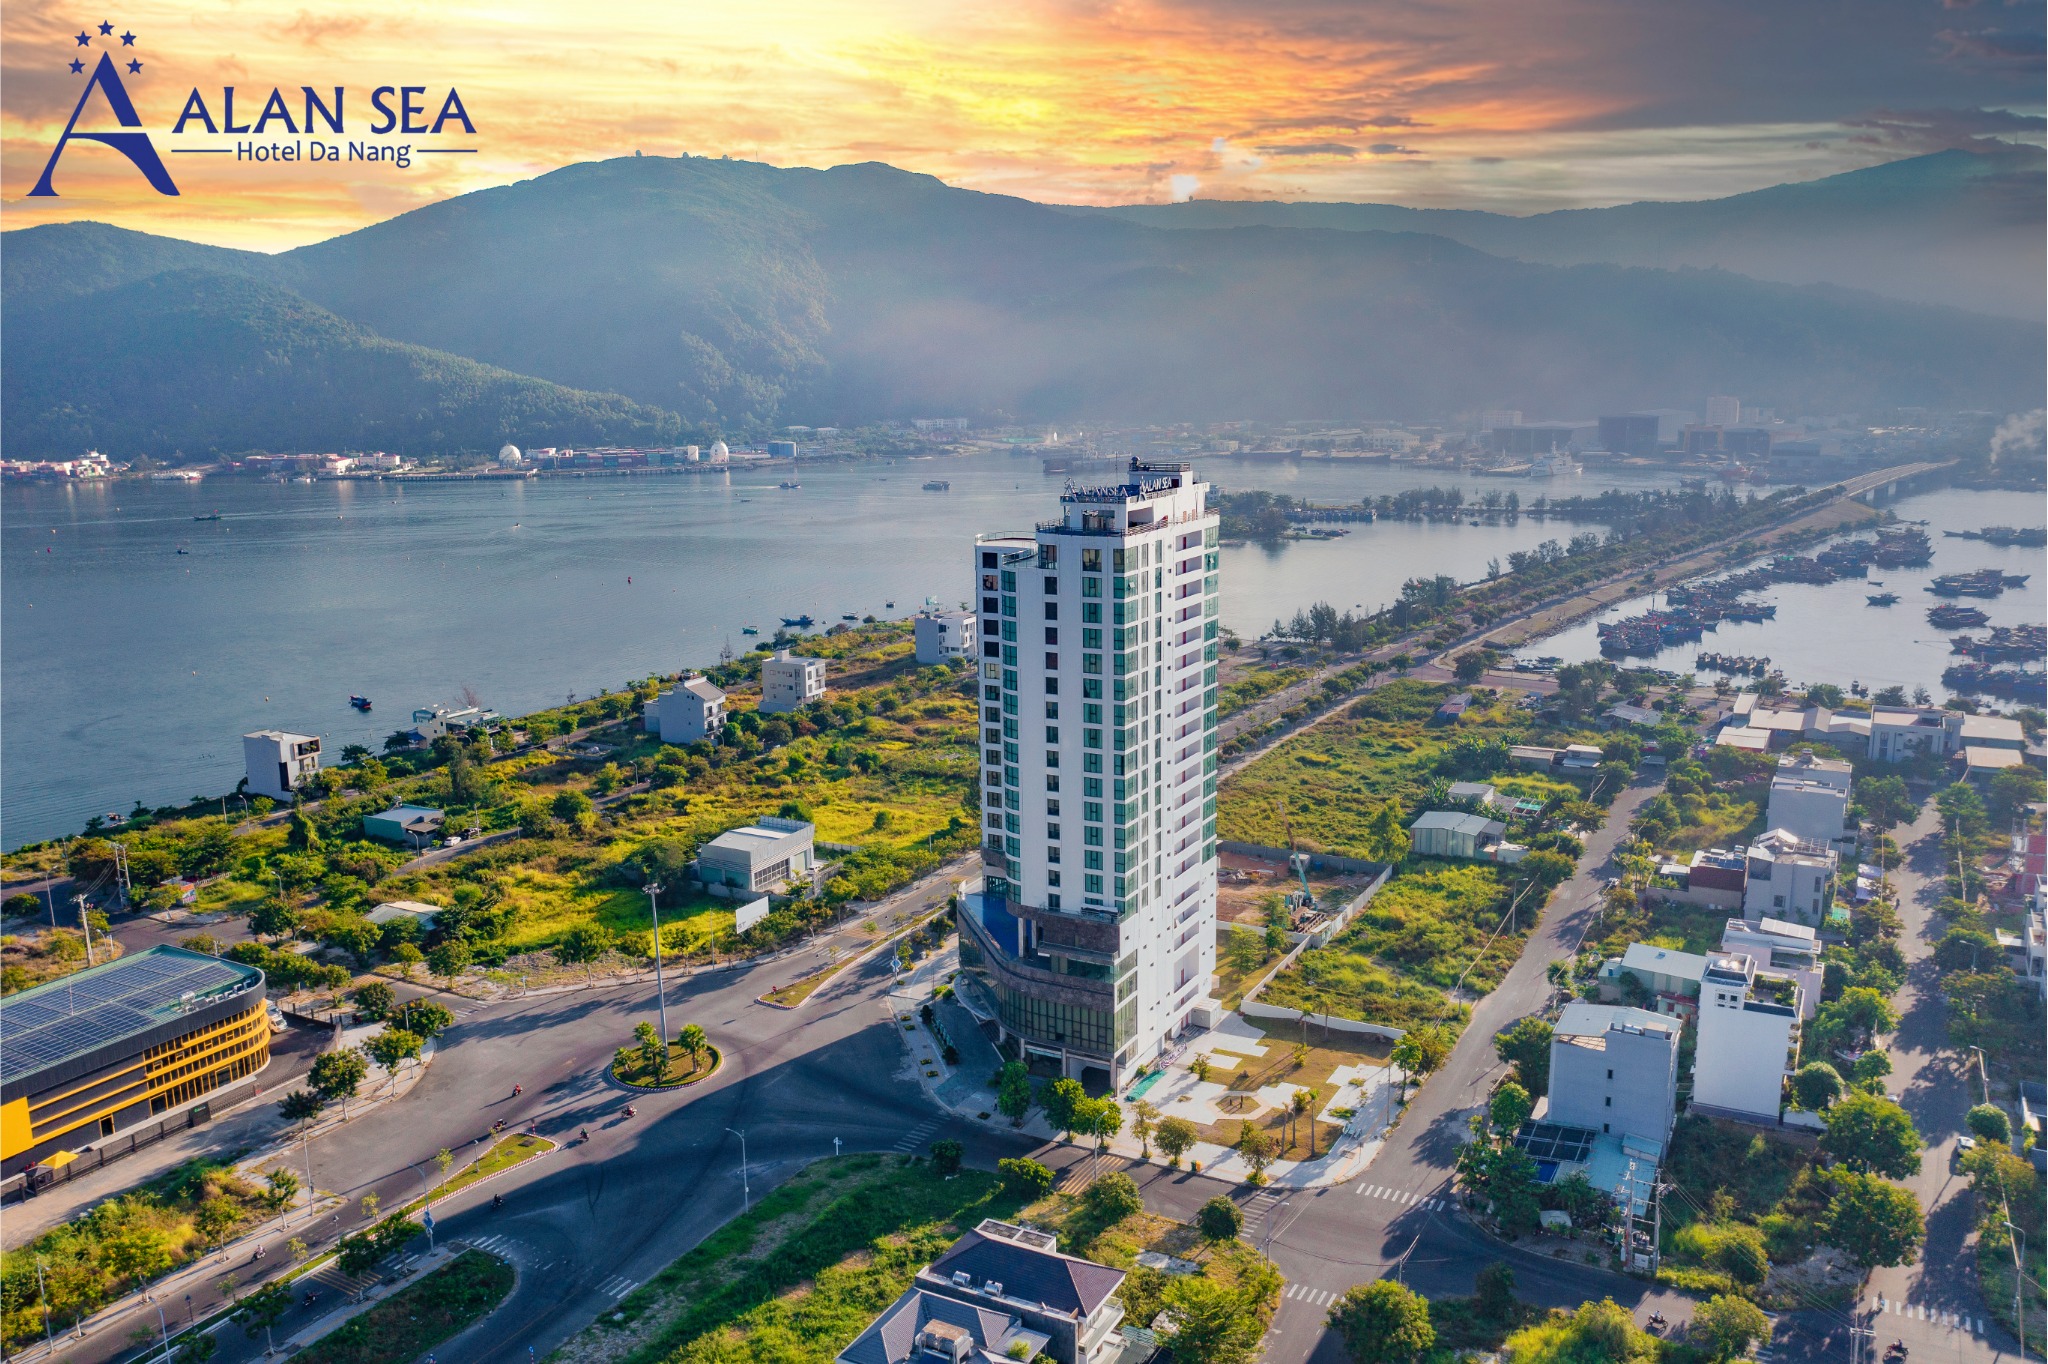 ☀️Immerse yourself in an authentic stay at the Alan Sea Hotel, Danang!☀️